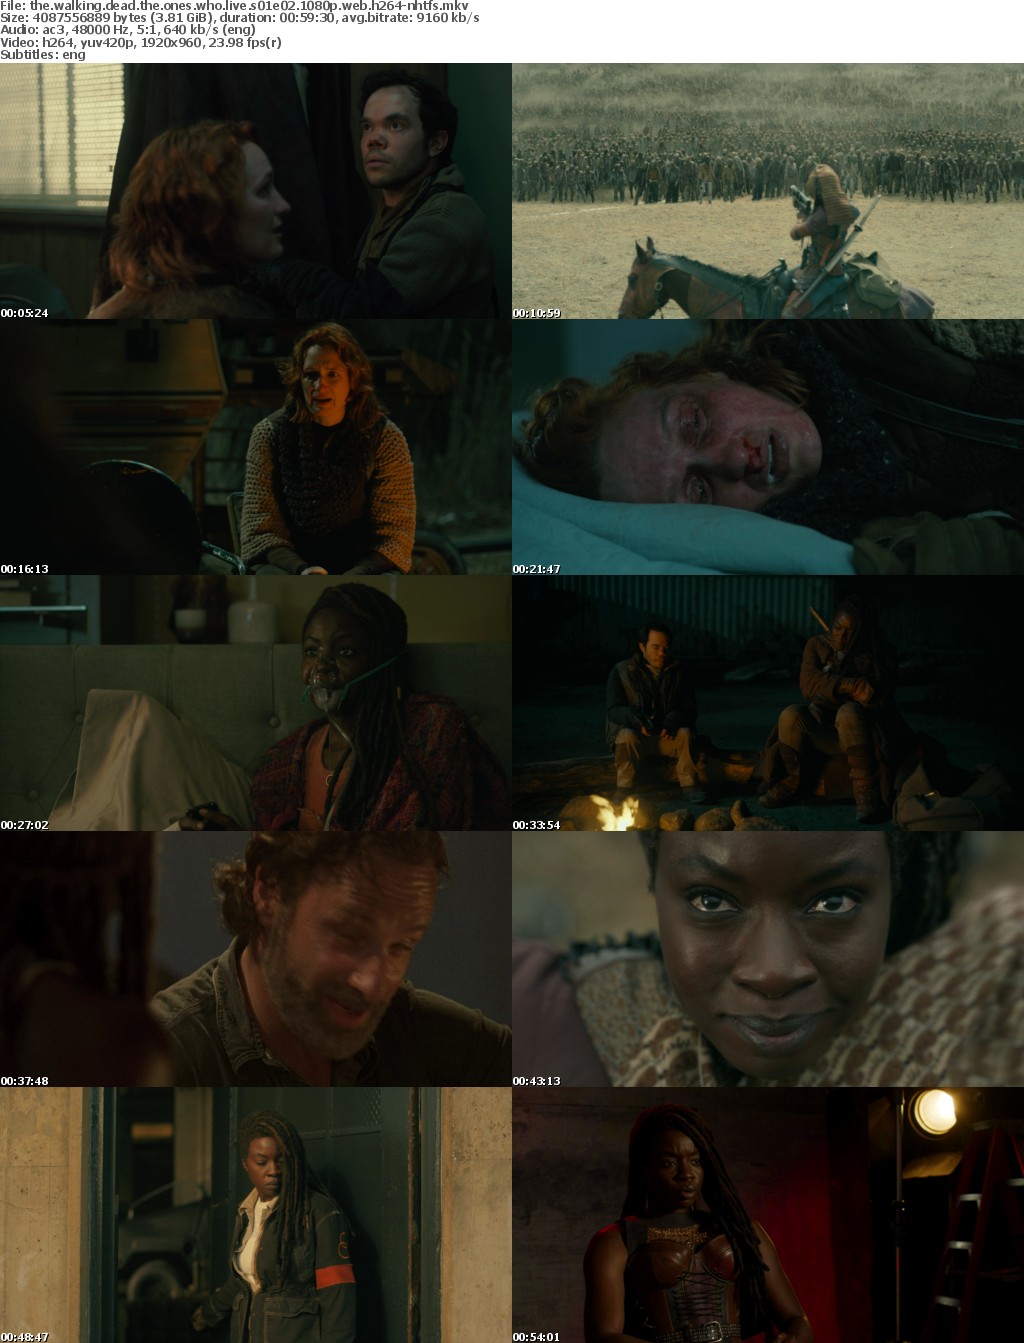 The Walking Dead The Ones Who Live S01E02 1080p WEB H264-NHTFS